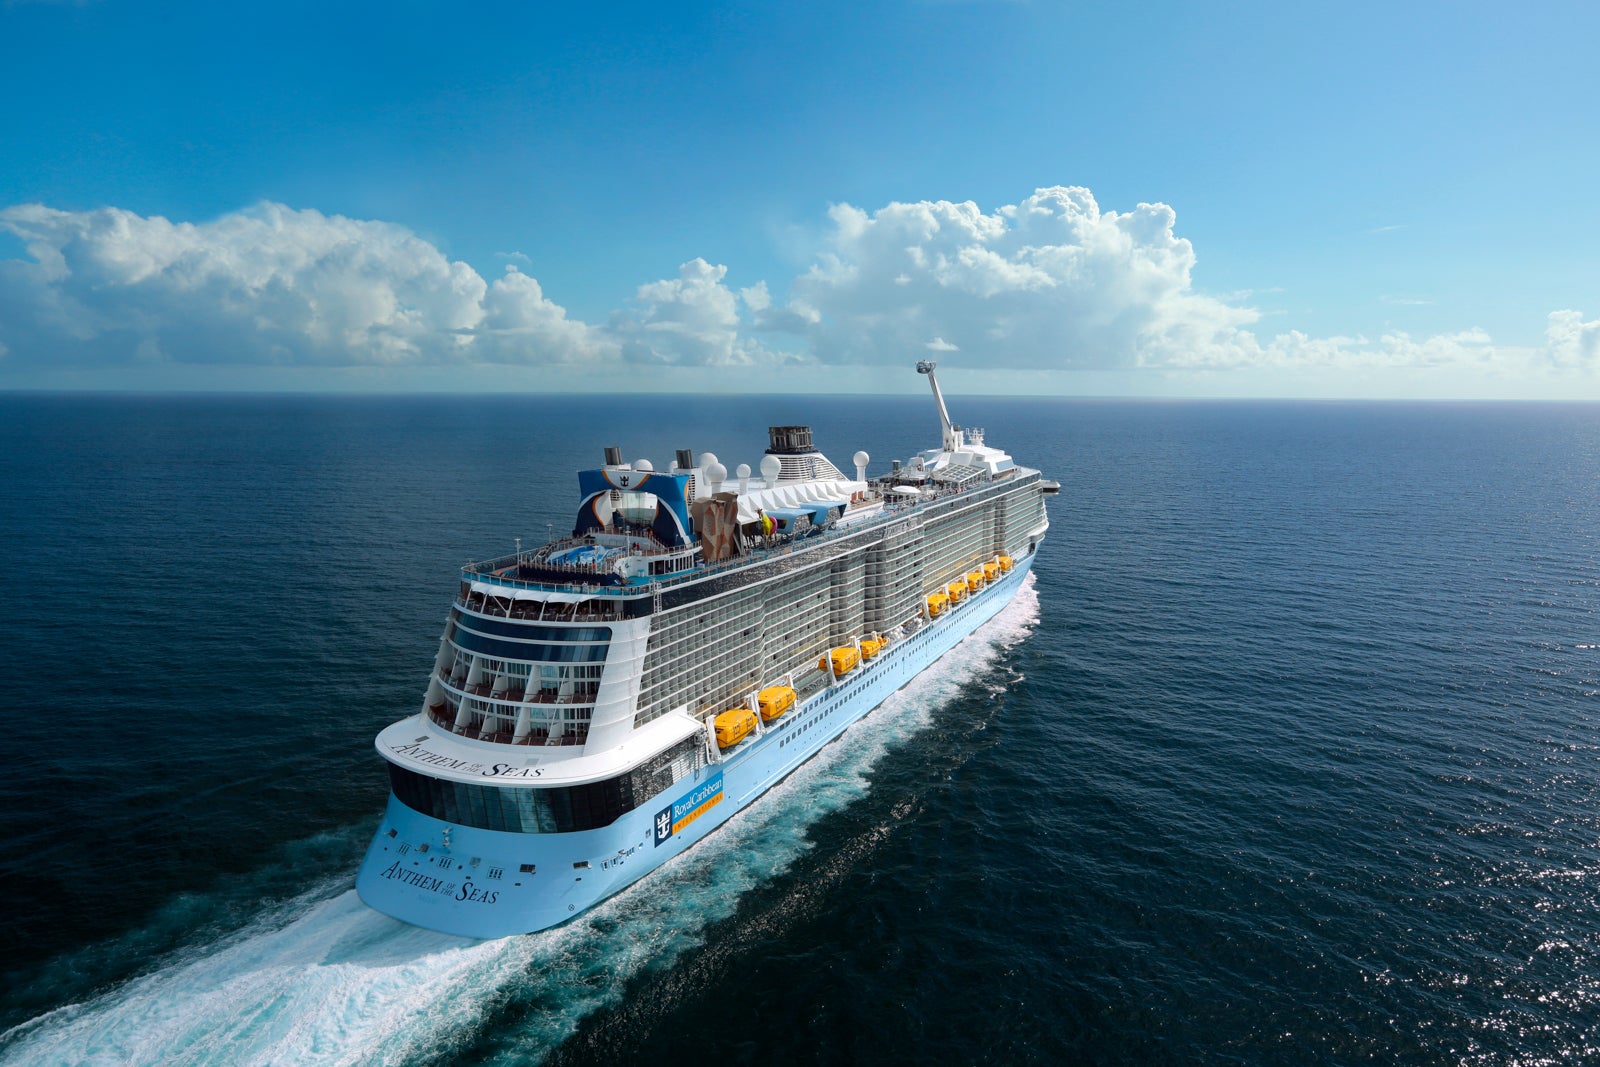 voyager of the seas launch date